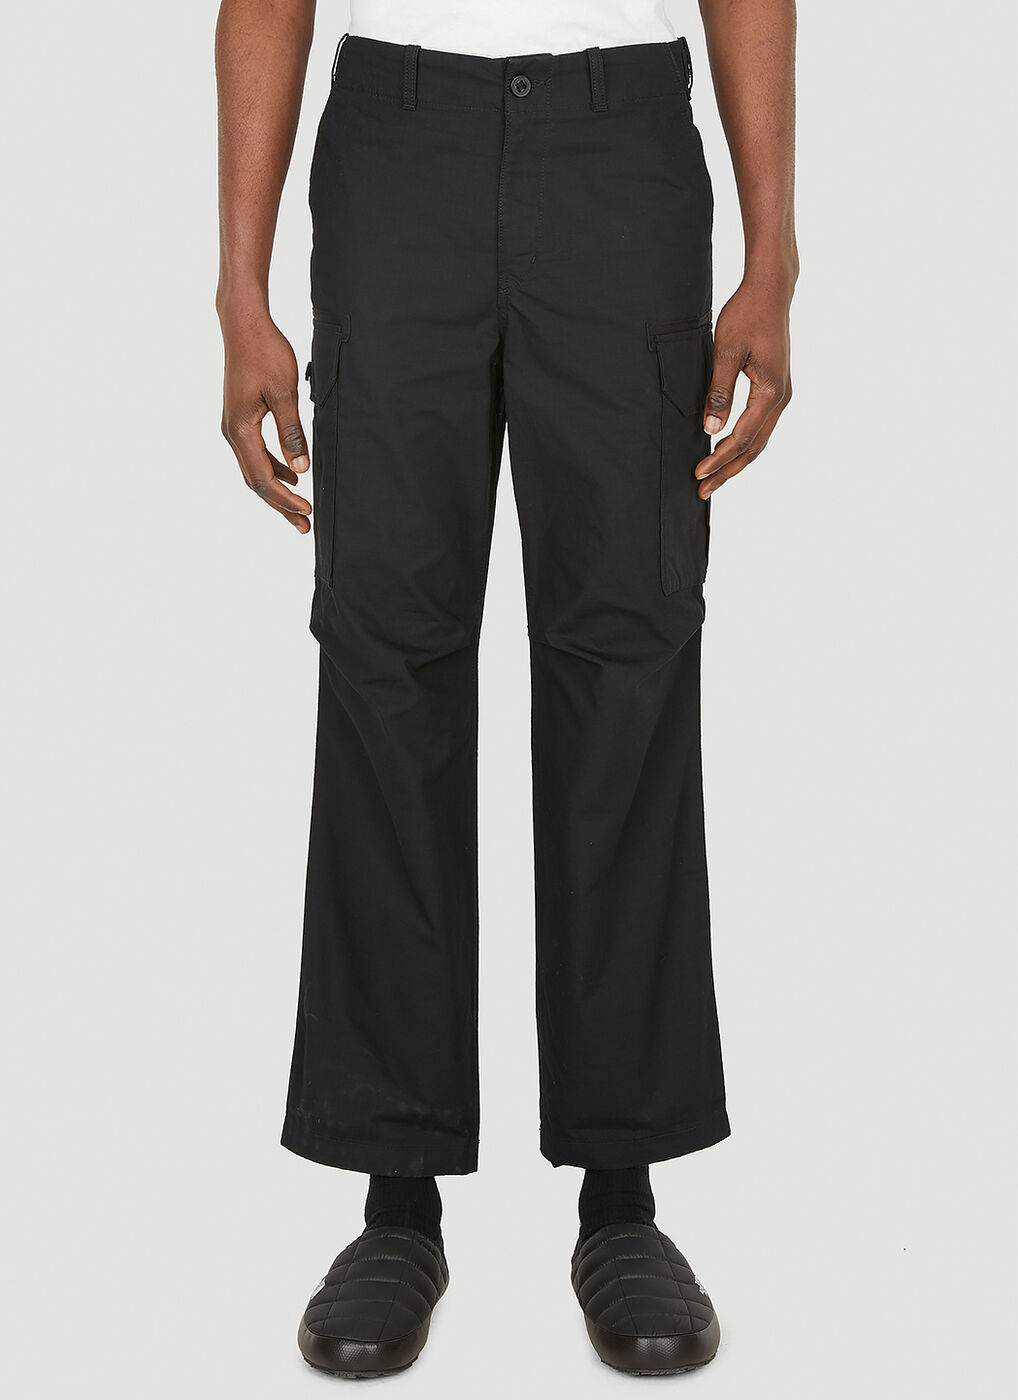 M66 Cargo Pants in Black The North Face